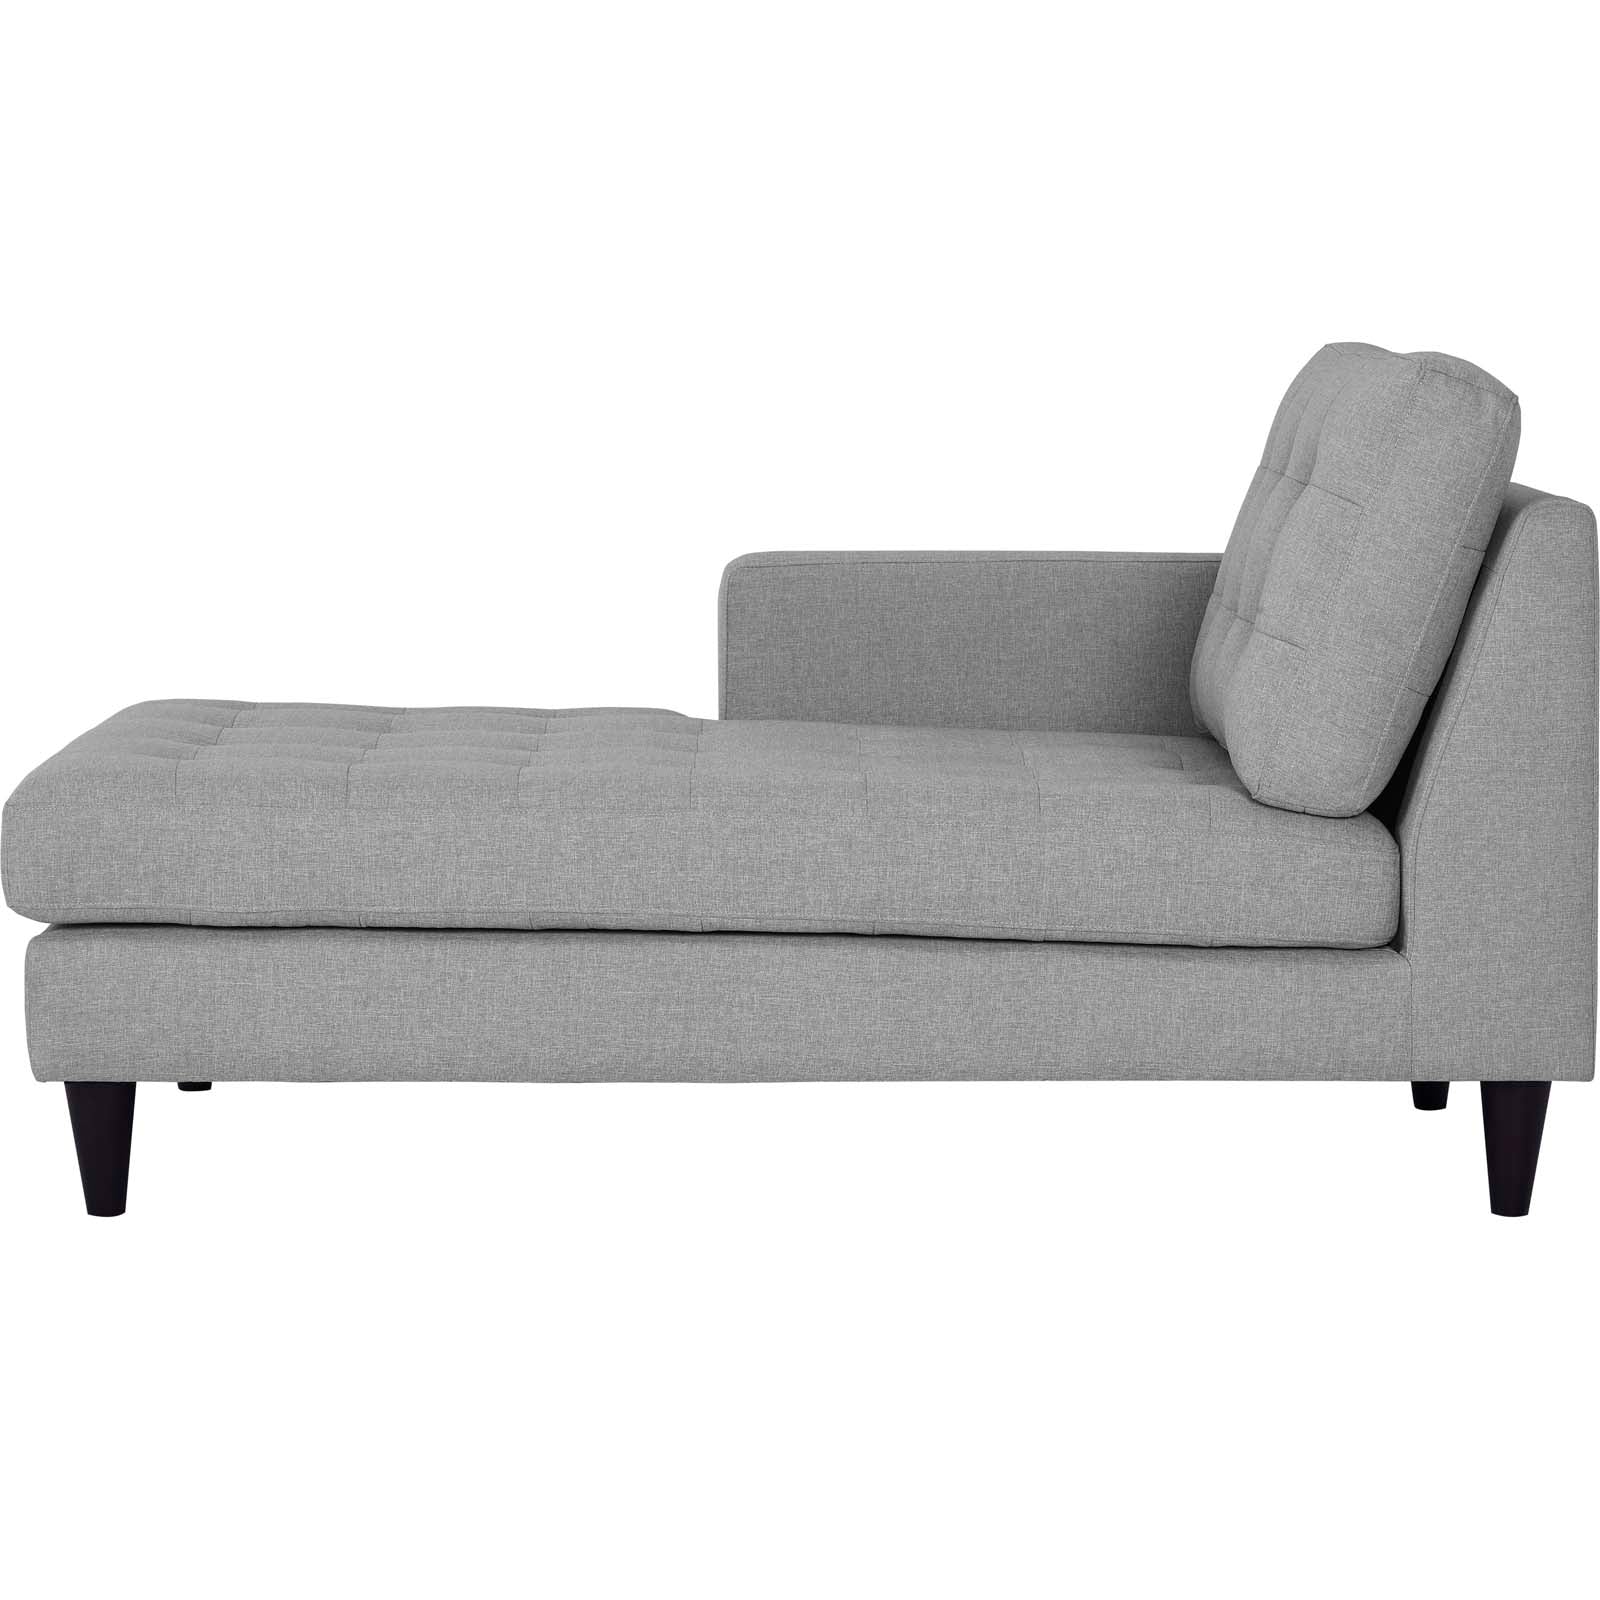 Modway Sleepers & Futons - Empress Left-Arm Upholstered Fabric Chaise Light Gray